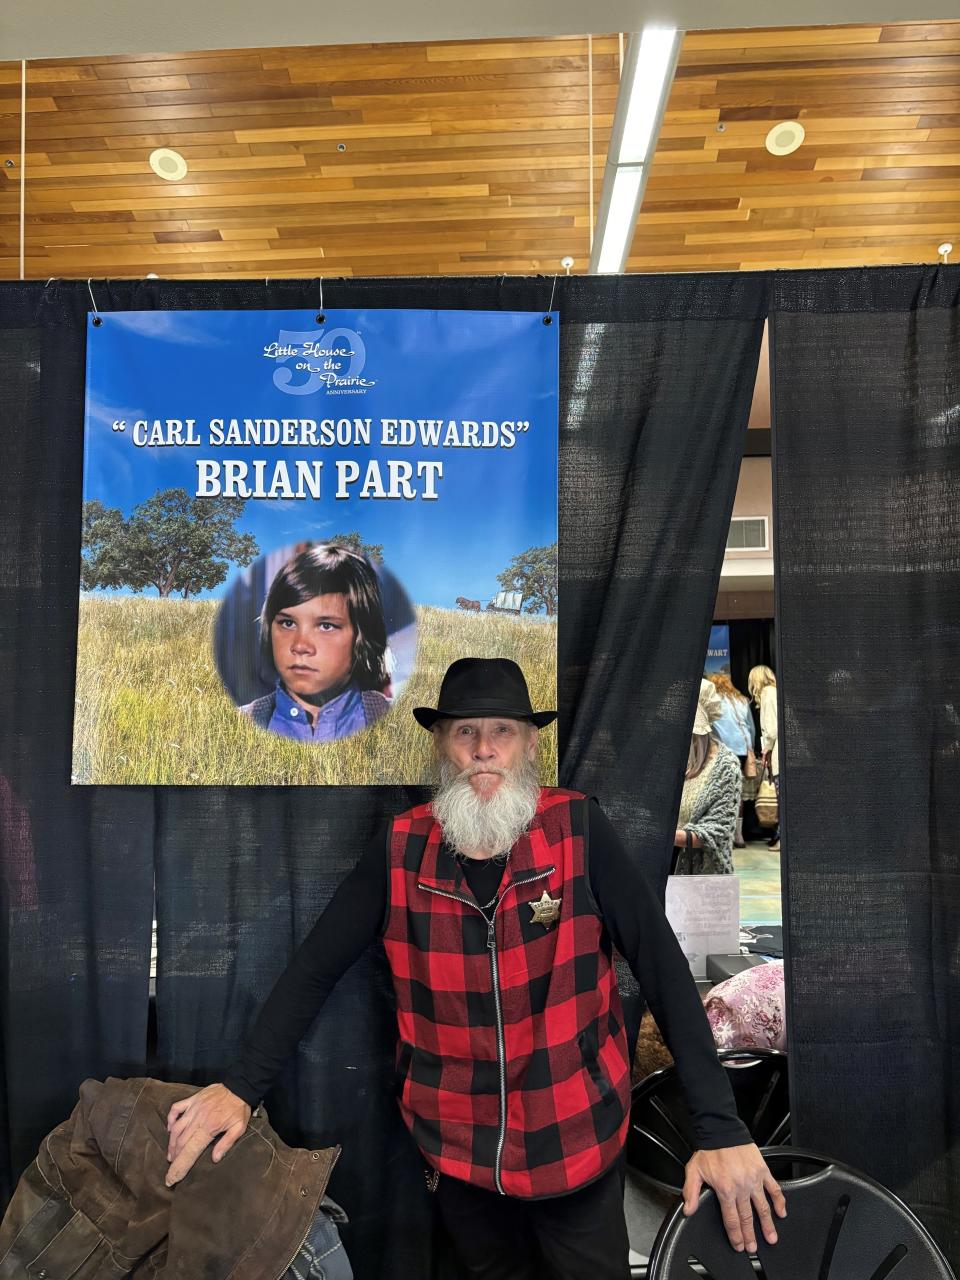 Brian Part played Carl Sanderson Edwards on "Little House on the Prairie."